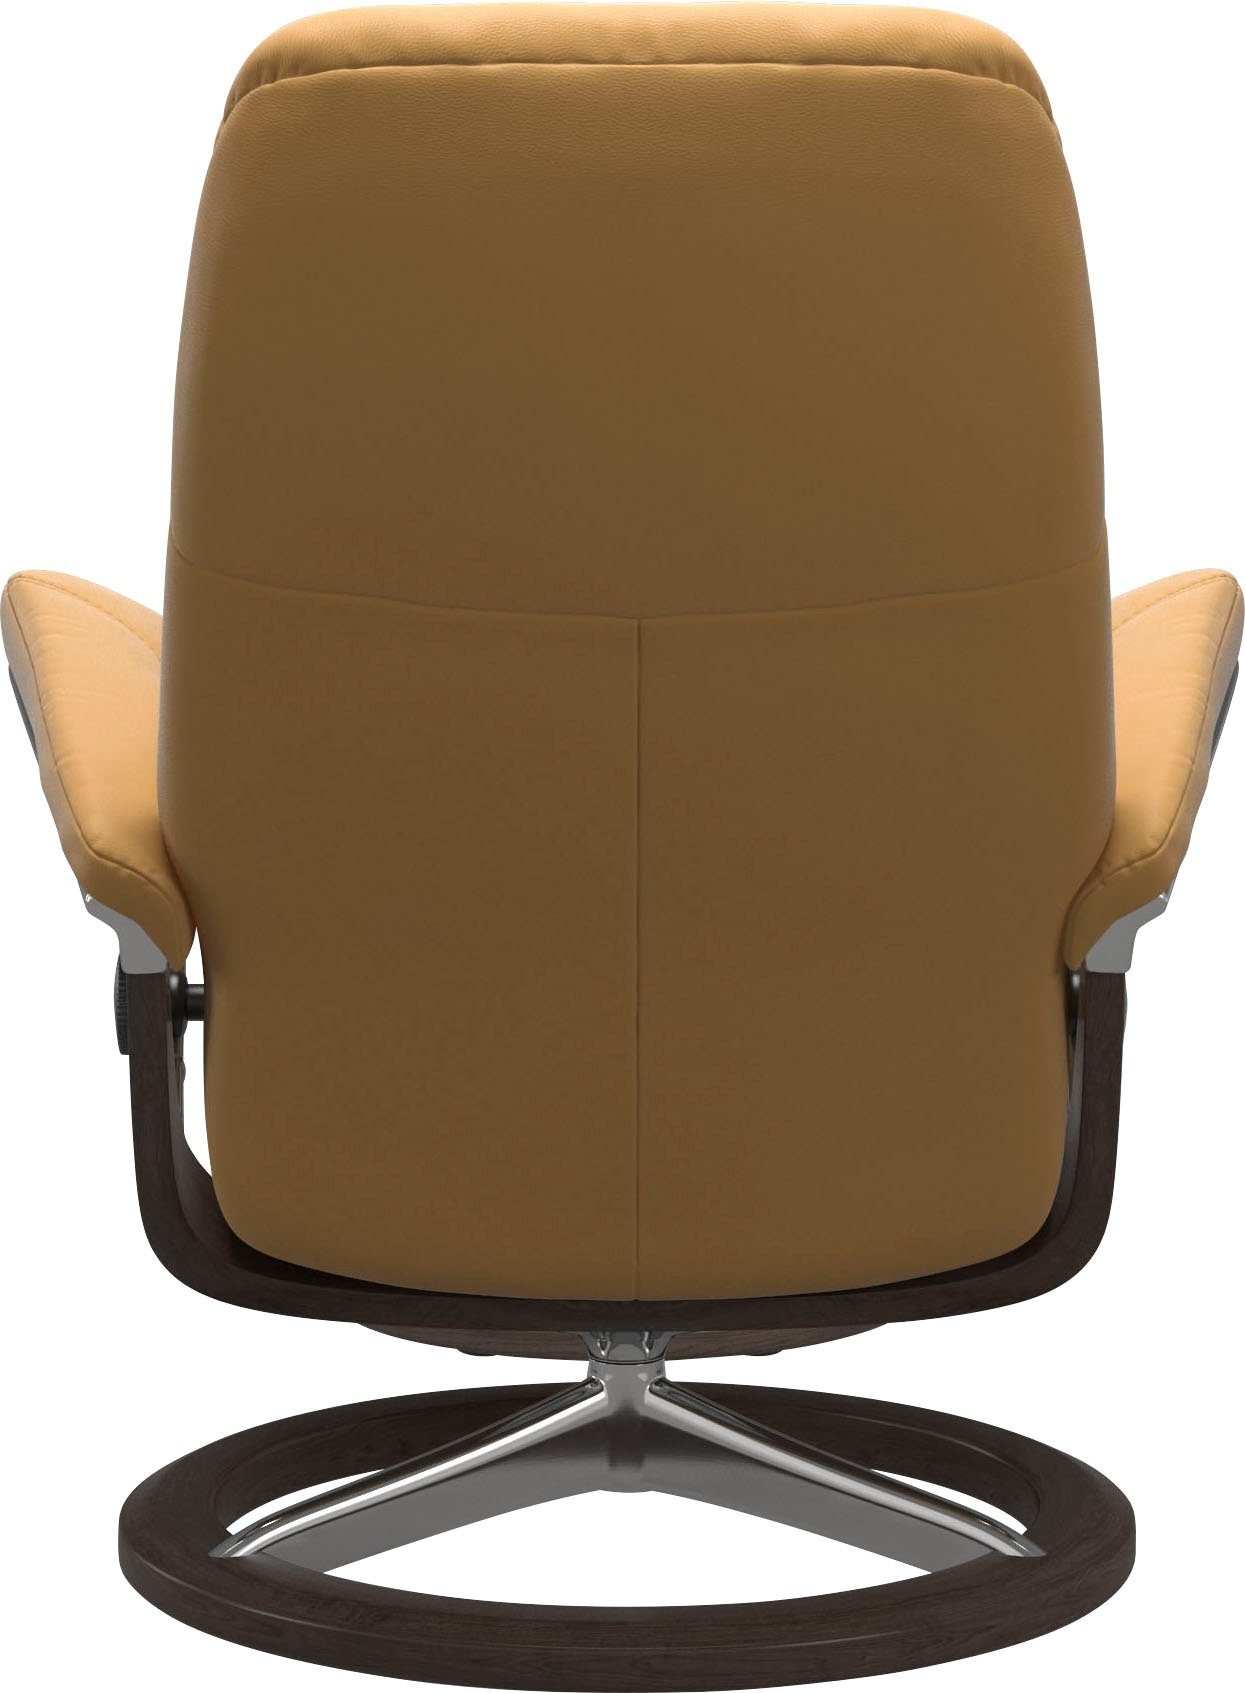 Base, Größe L, mit Consul, Relaxsessel Signature Wenge Stressless® Gestell